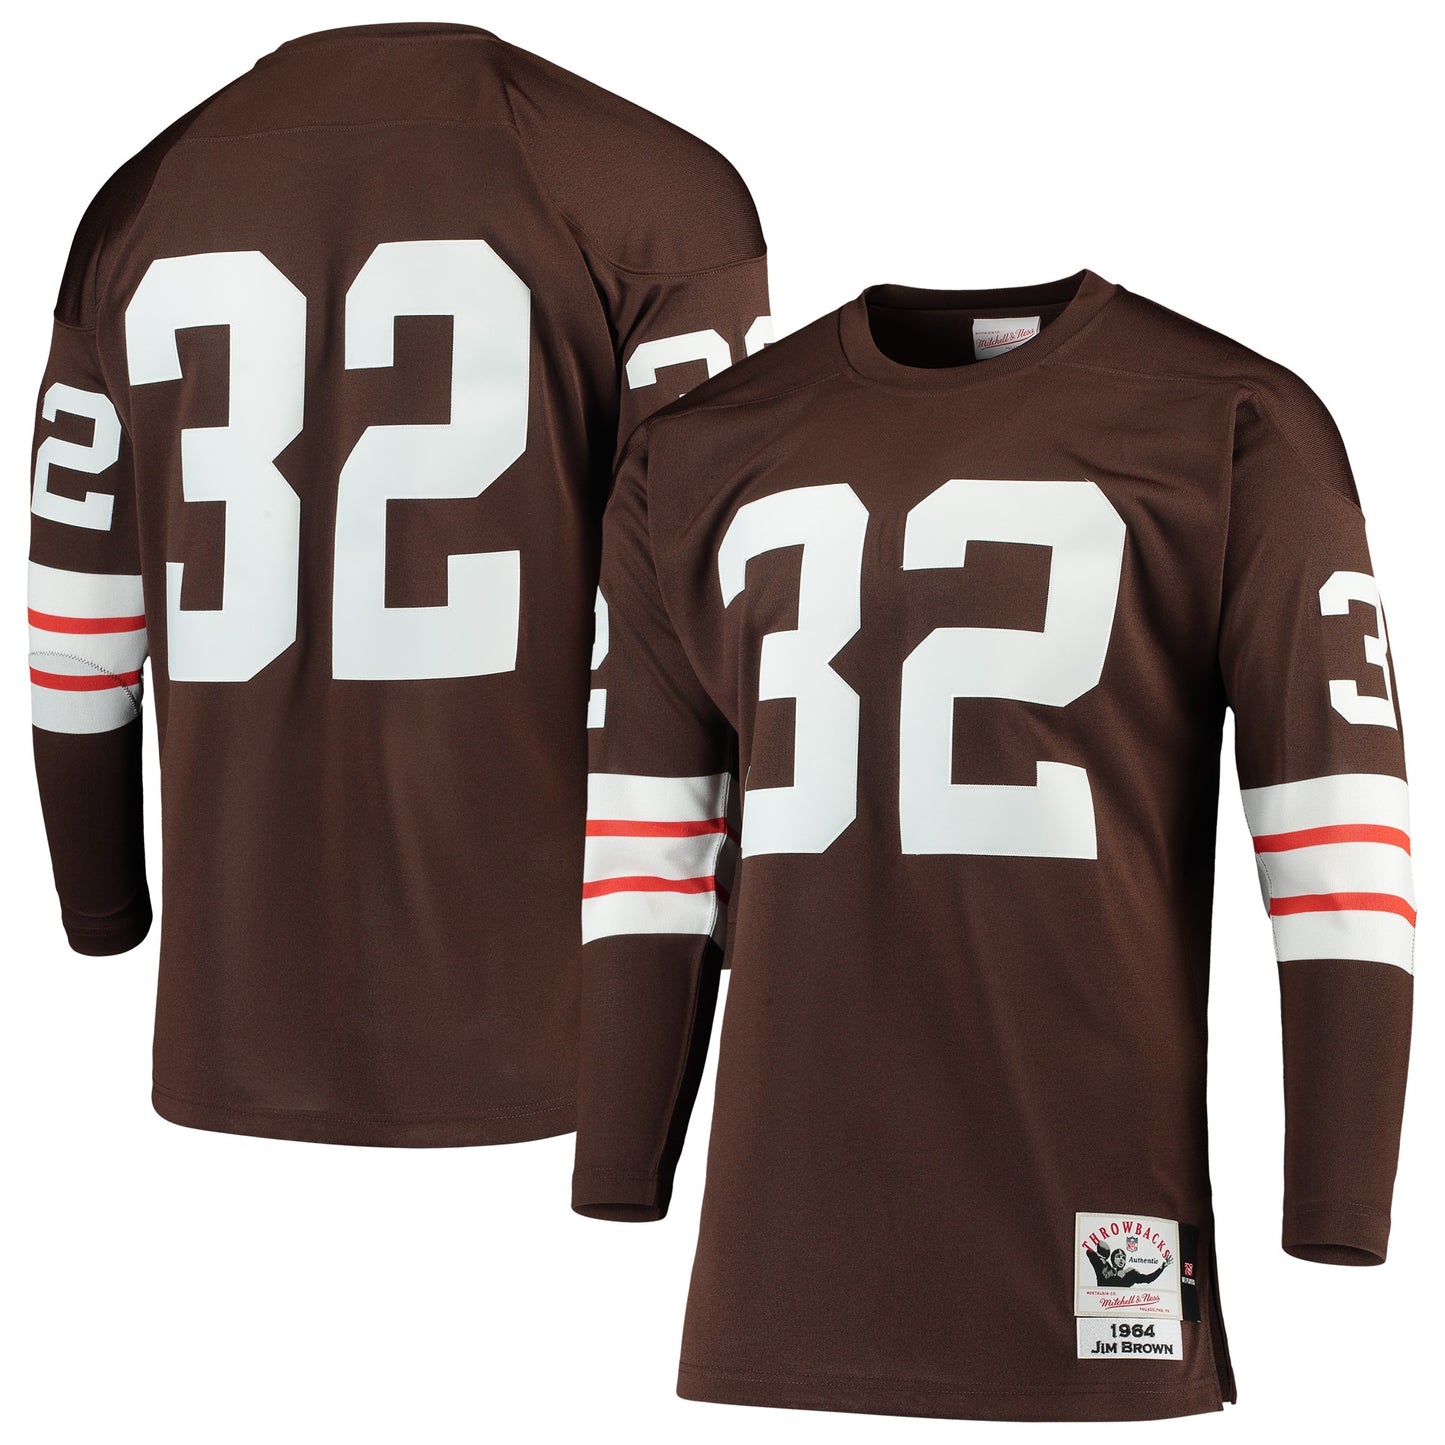 Jim Brown Cleveland Browns Mitchell & Ness 1964 Authentic Throwback Retired Player Jersey - Brown